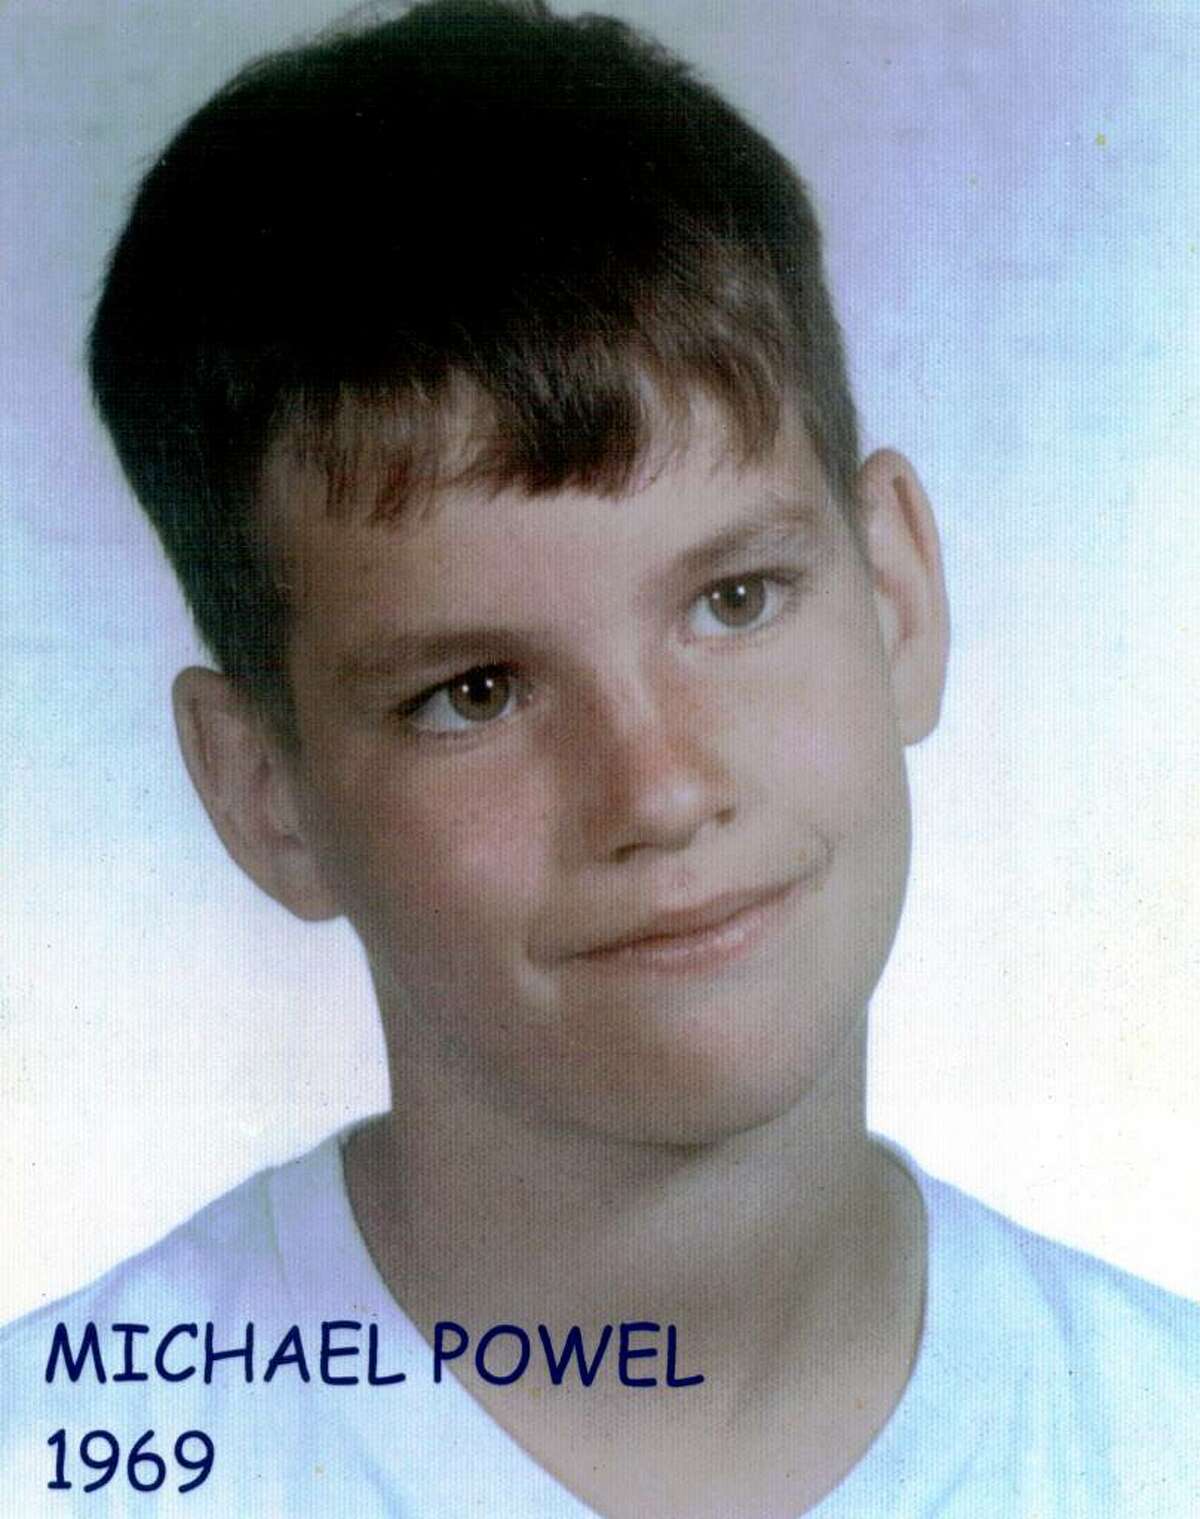 photo of Michael Powel taken in 1969 at age 10 and at the time he would have been a student and parishioner at St. Peter's parish in Bridgeport, CT. parish in Bridgeport. Michael had begun being abused by Carlo Fabbozzi during the year prior, 1968, while working with Fabbozzi and Michael's brother Luke at St. Theresa's parish in Trumbull.